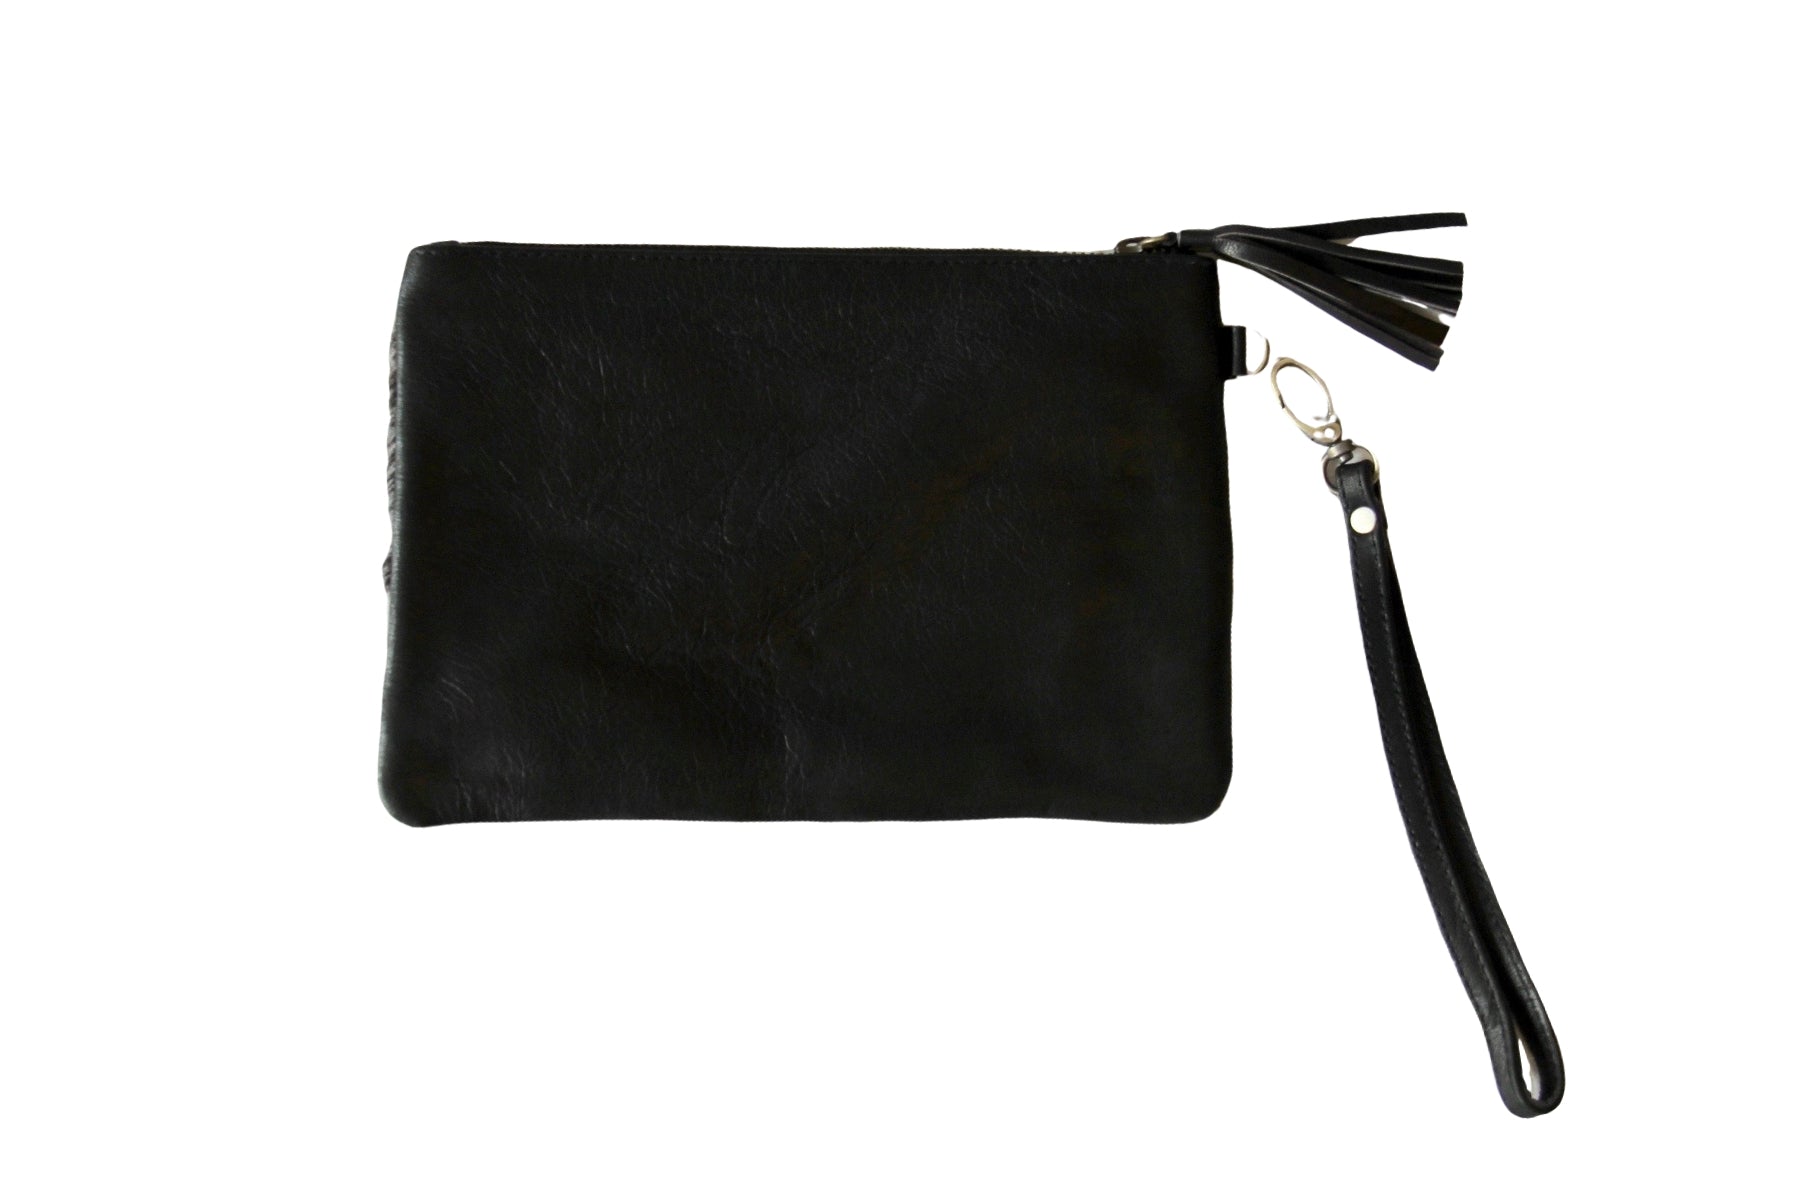 Delilah Clutch in Black and White Ponyhair leather - Kardia